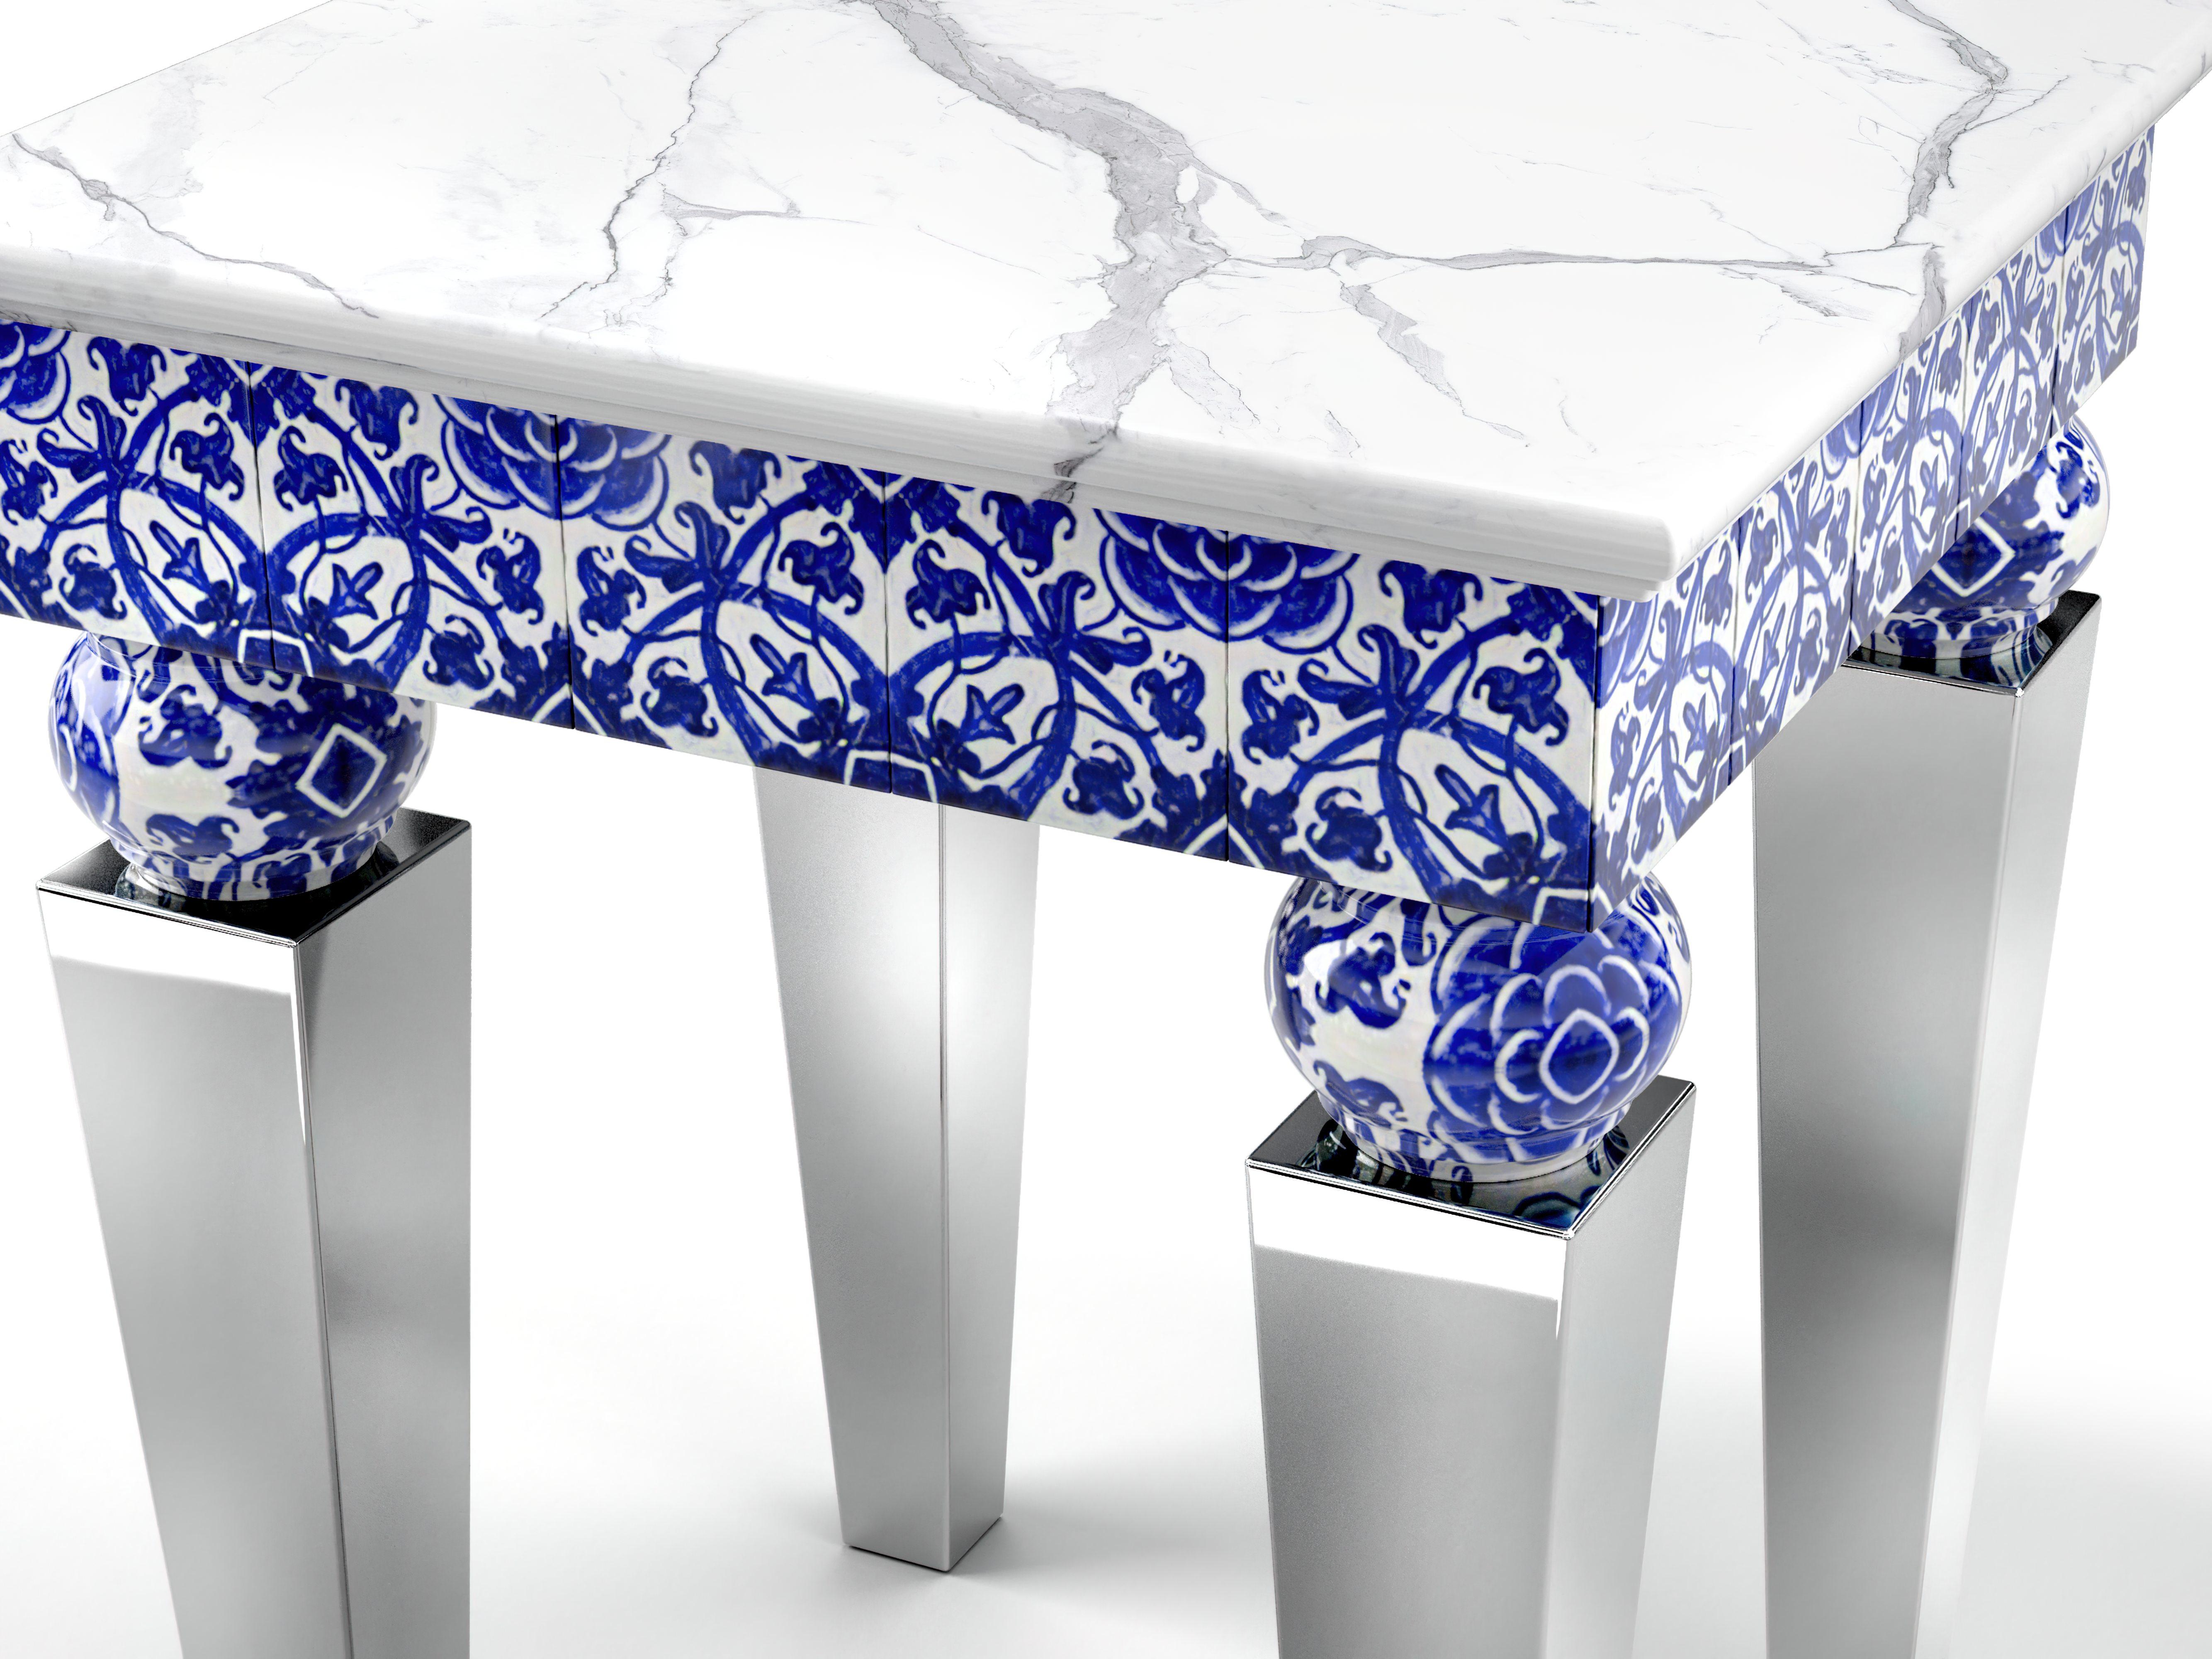 Two Side Tables, White Marble, Mirror Steel, Blue Majolica Tiles, Also Outdoor For Sale 1